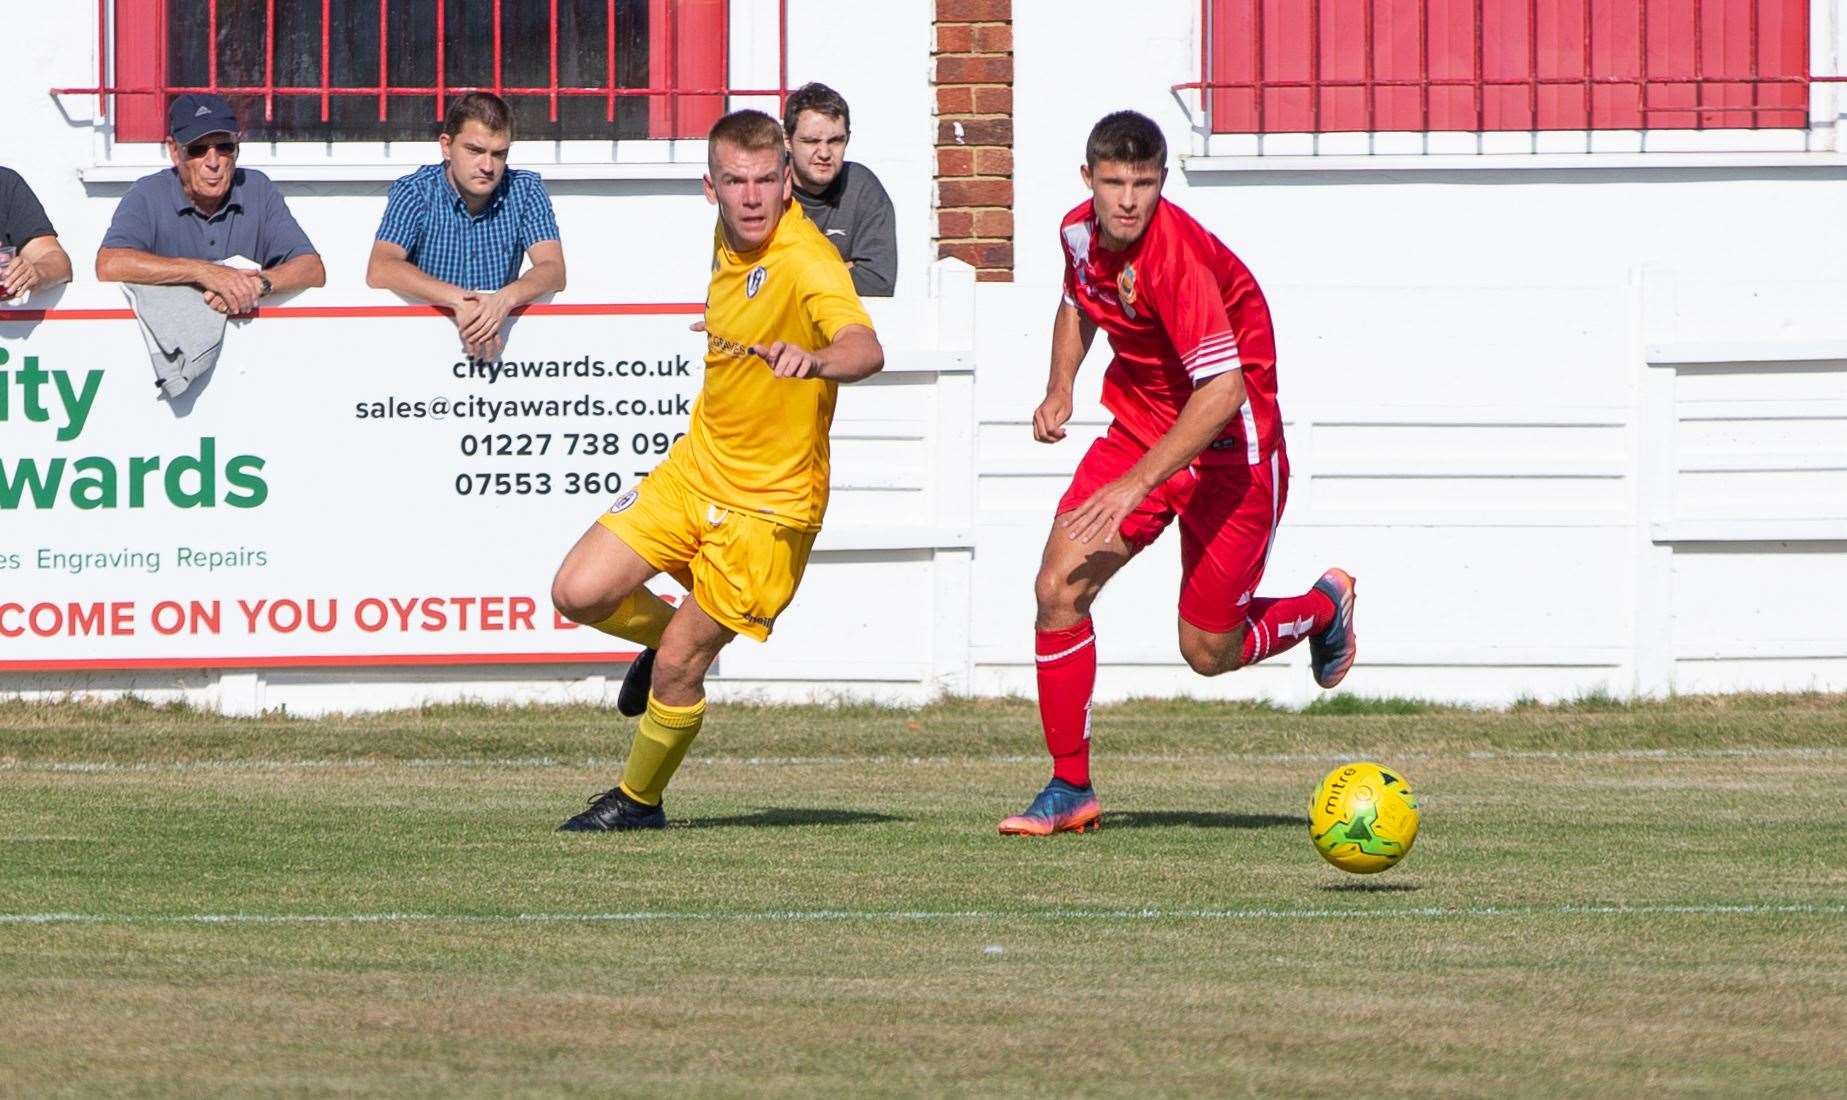 Marshall Wratten in action for Whitstable against Haywards Heath